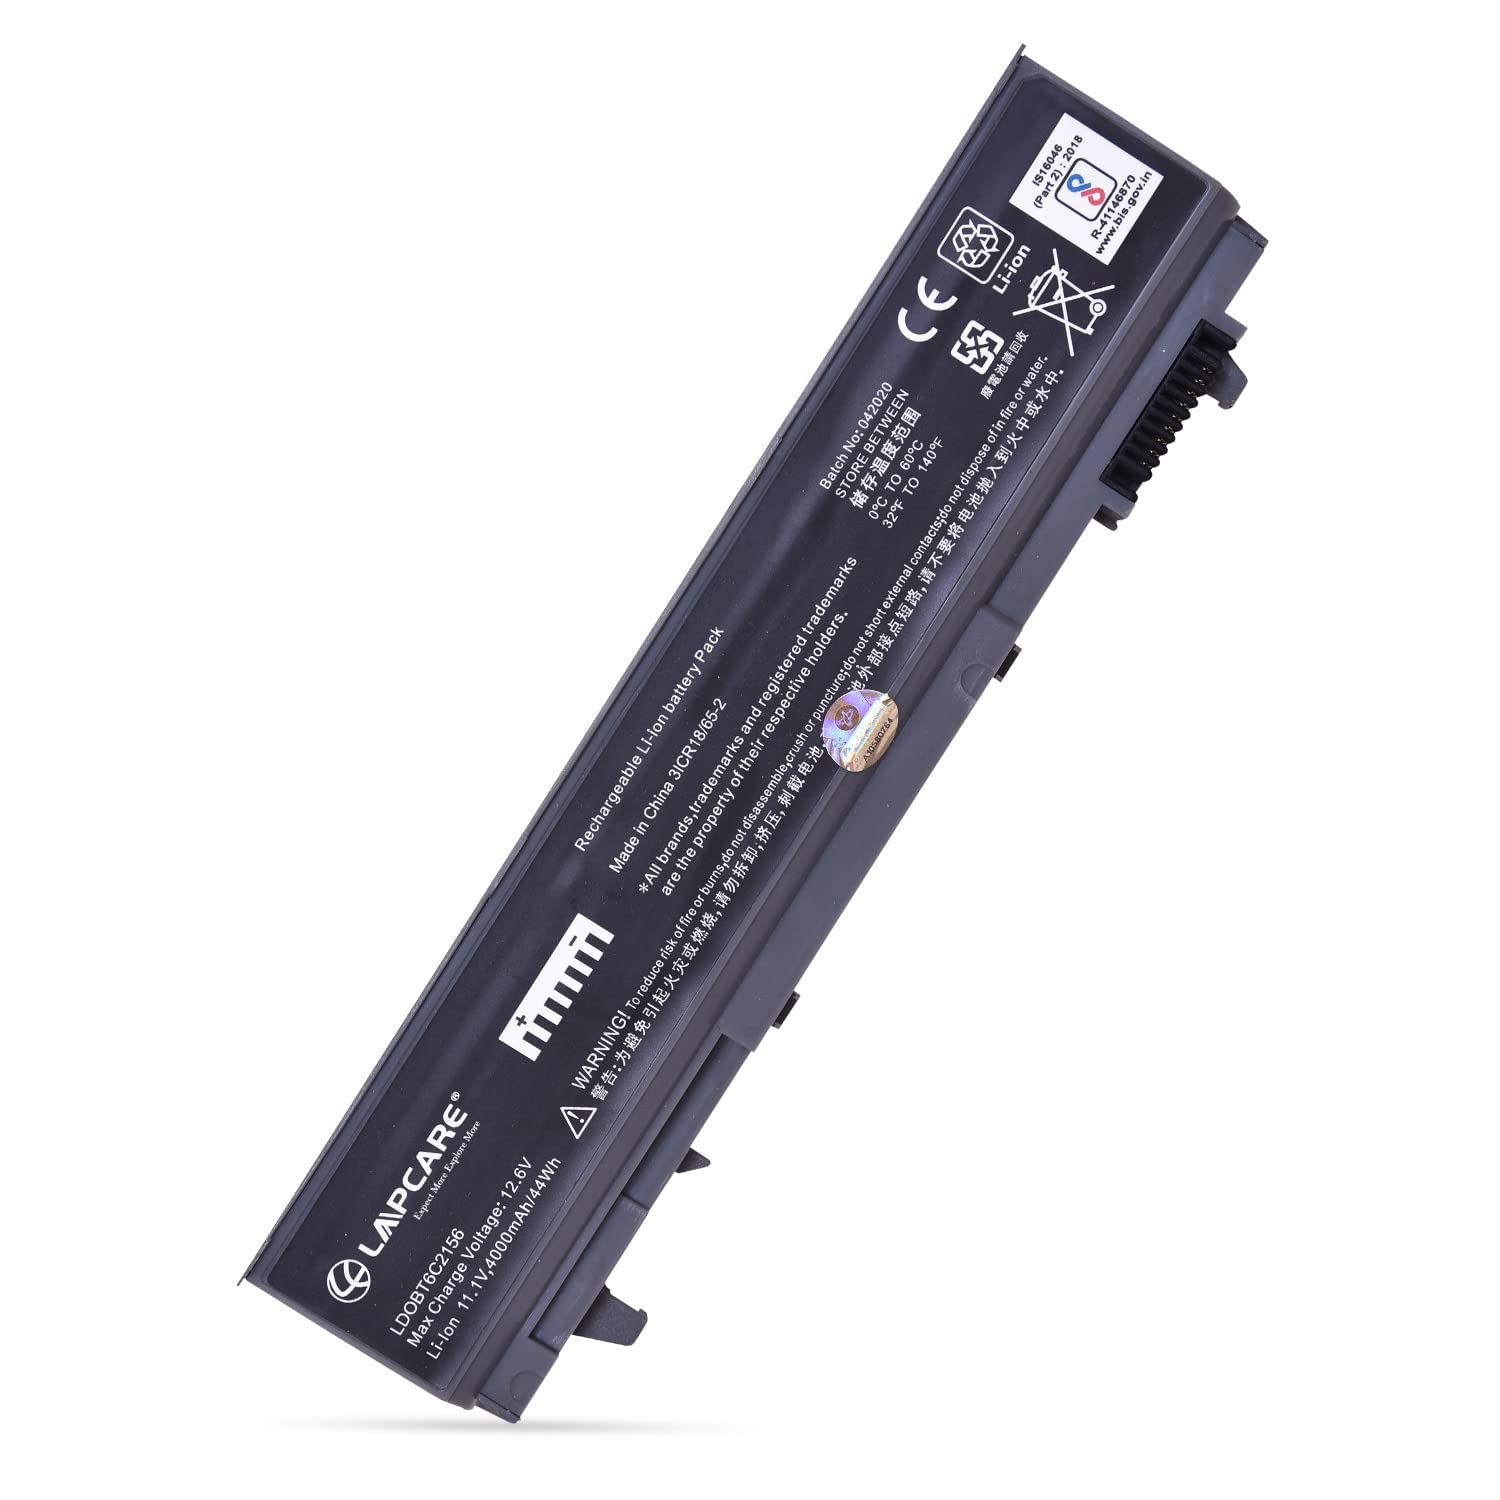 LAPCARE 11.1V 4000mAh 6 Cell BIS Certified Compatible Lithium-ion Laptop Battery for DELL Latitude E6500 E6510 and E6500n Models